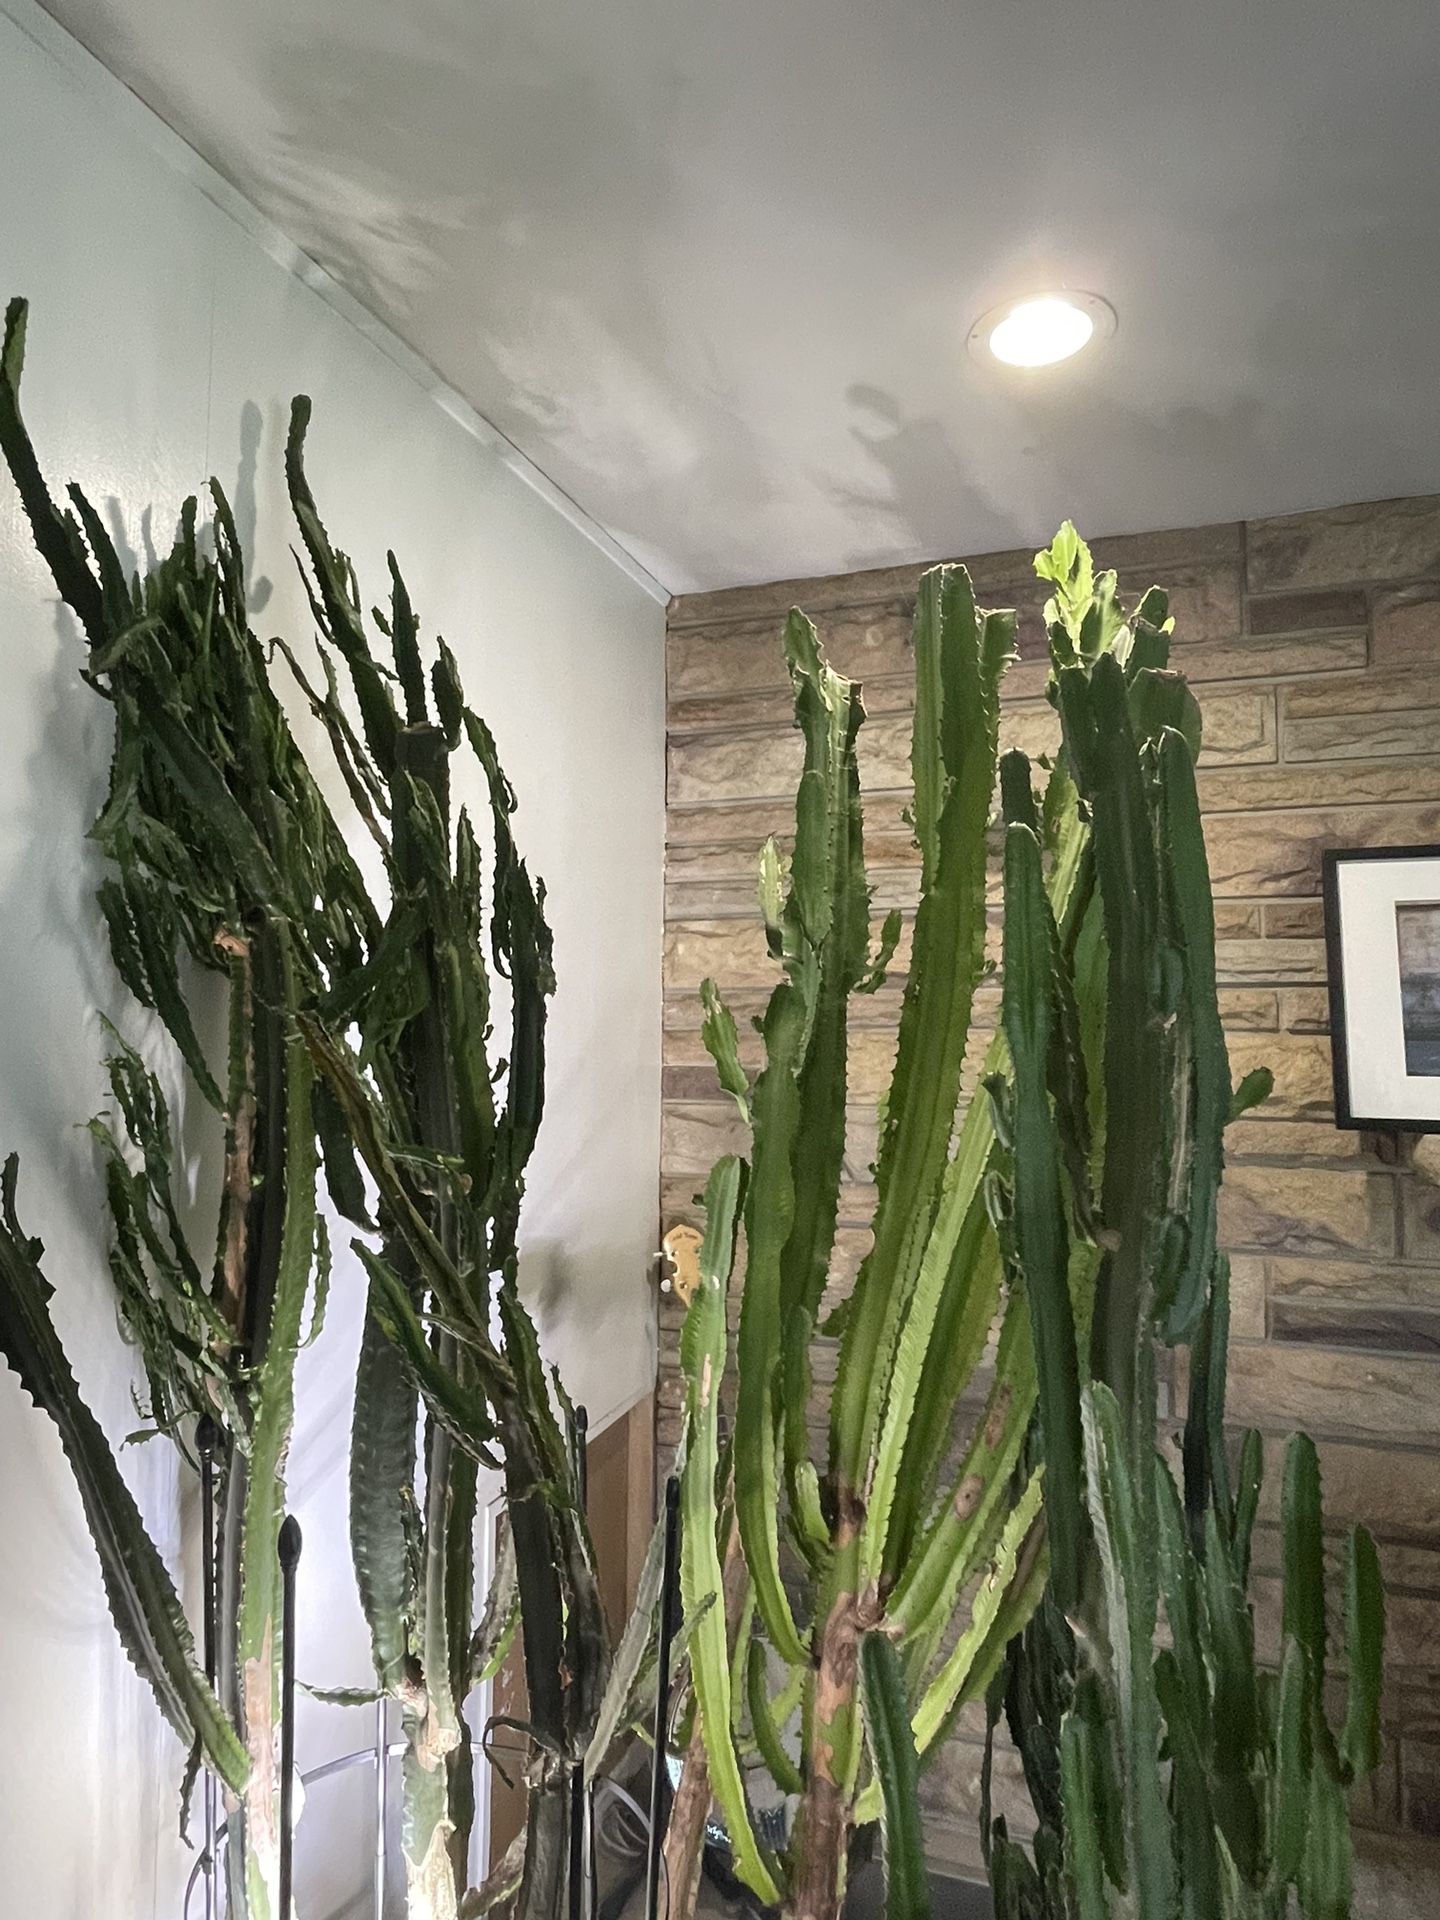 4 Foot-6 Foot Cactus Plants For Sale 